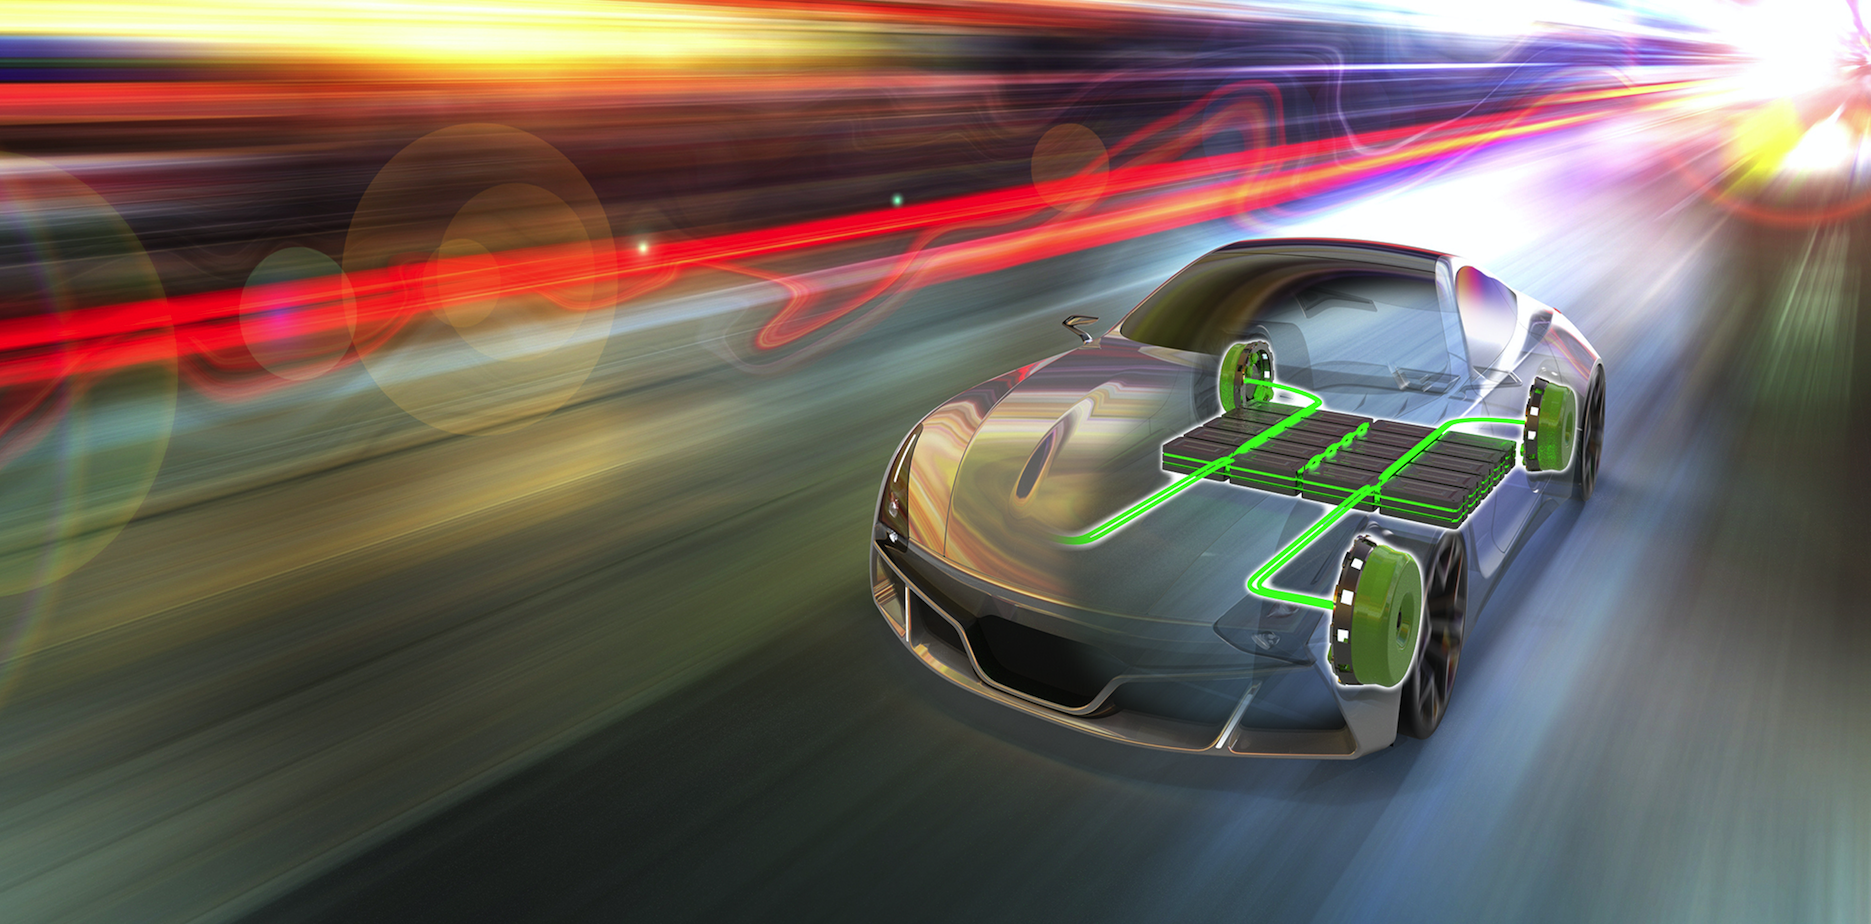 HyperWorks 2017 supports companies designing the next generation of vehicles